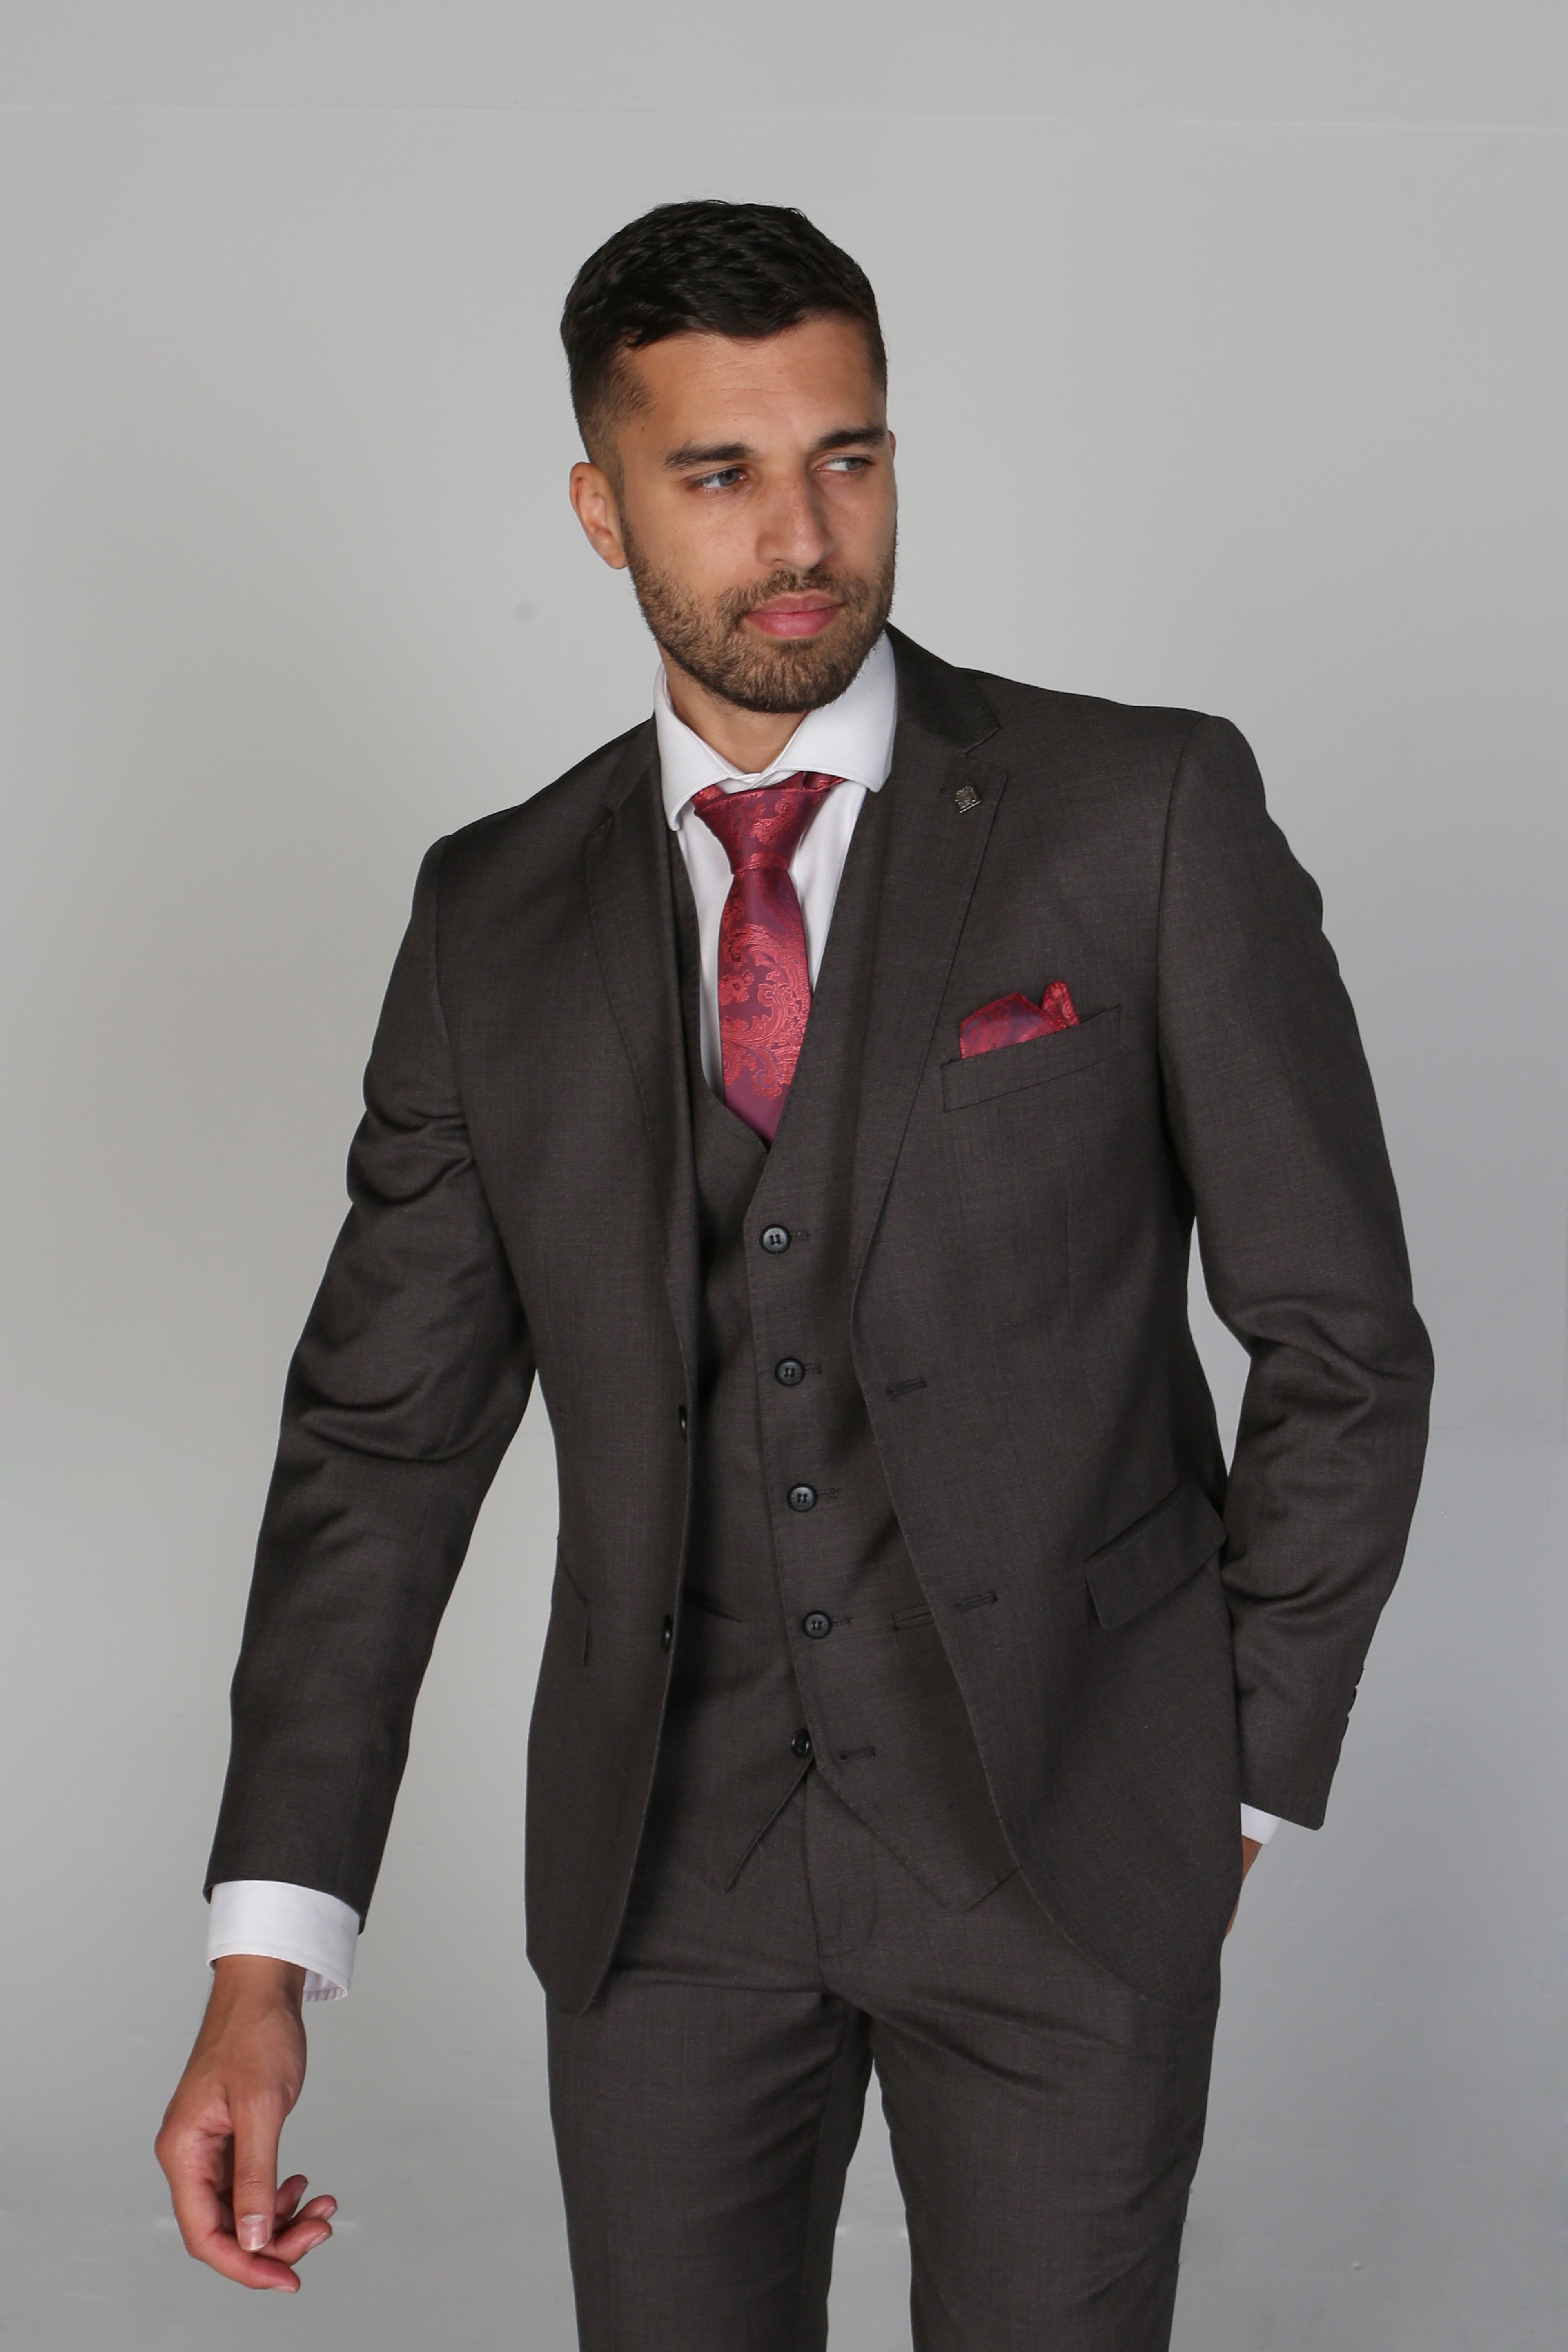 Men's Tailored Fit Formal Suit  - CHARLES